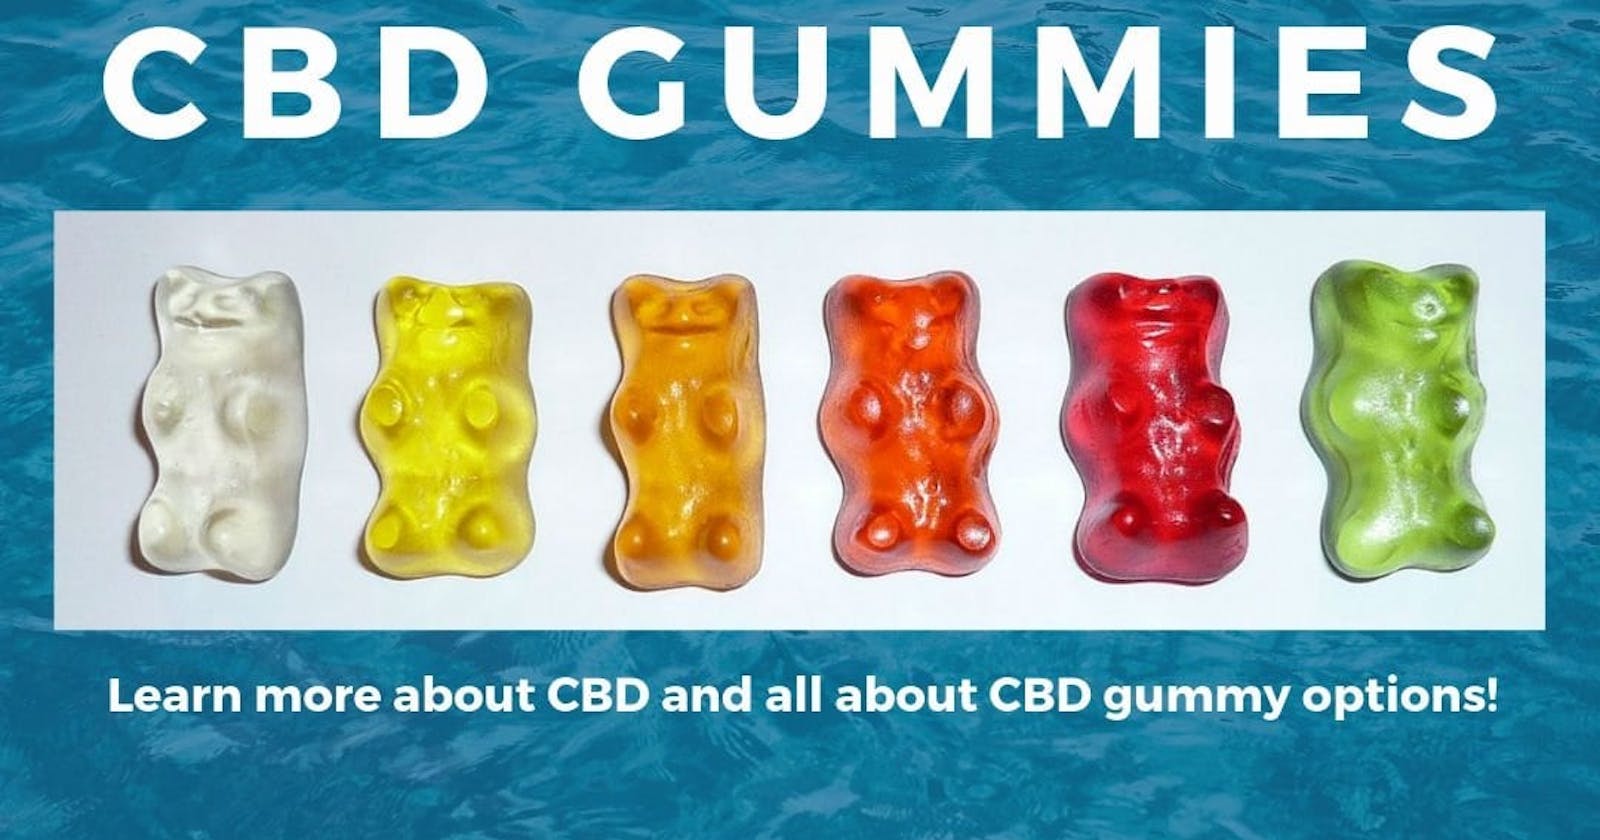 Anatomy 1 CBD Gummies Shocking Reviews: Cost Revealed, Must Check Scam Before Buying 
Is It Worth For You Or Scam Shocking?